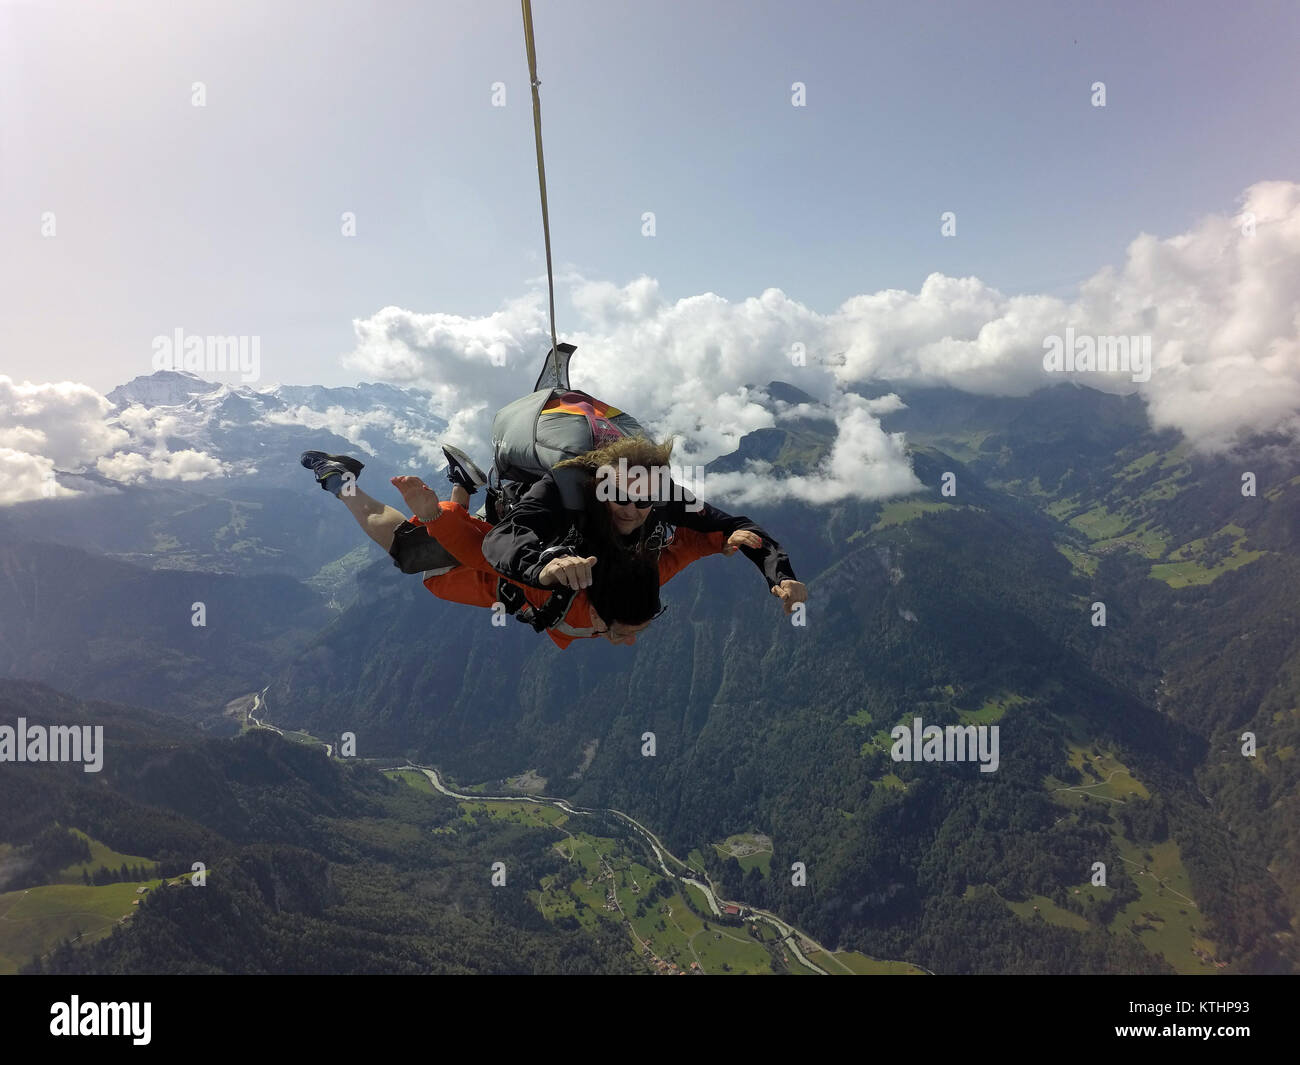 This tandem skydiving team is enjoying the scenic flight over a beautiful mountain and lake area. Check out the smiley face from the passenger! Stock Photo